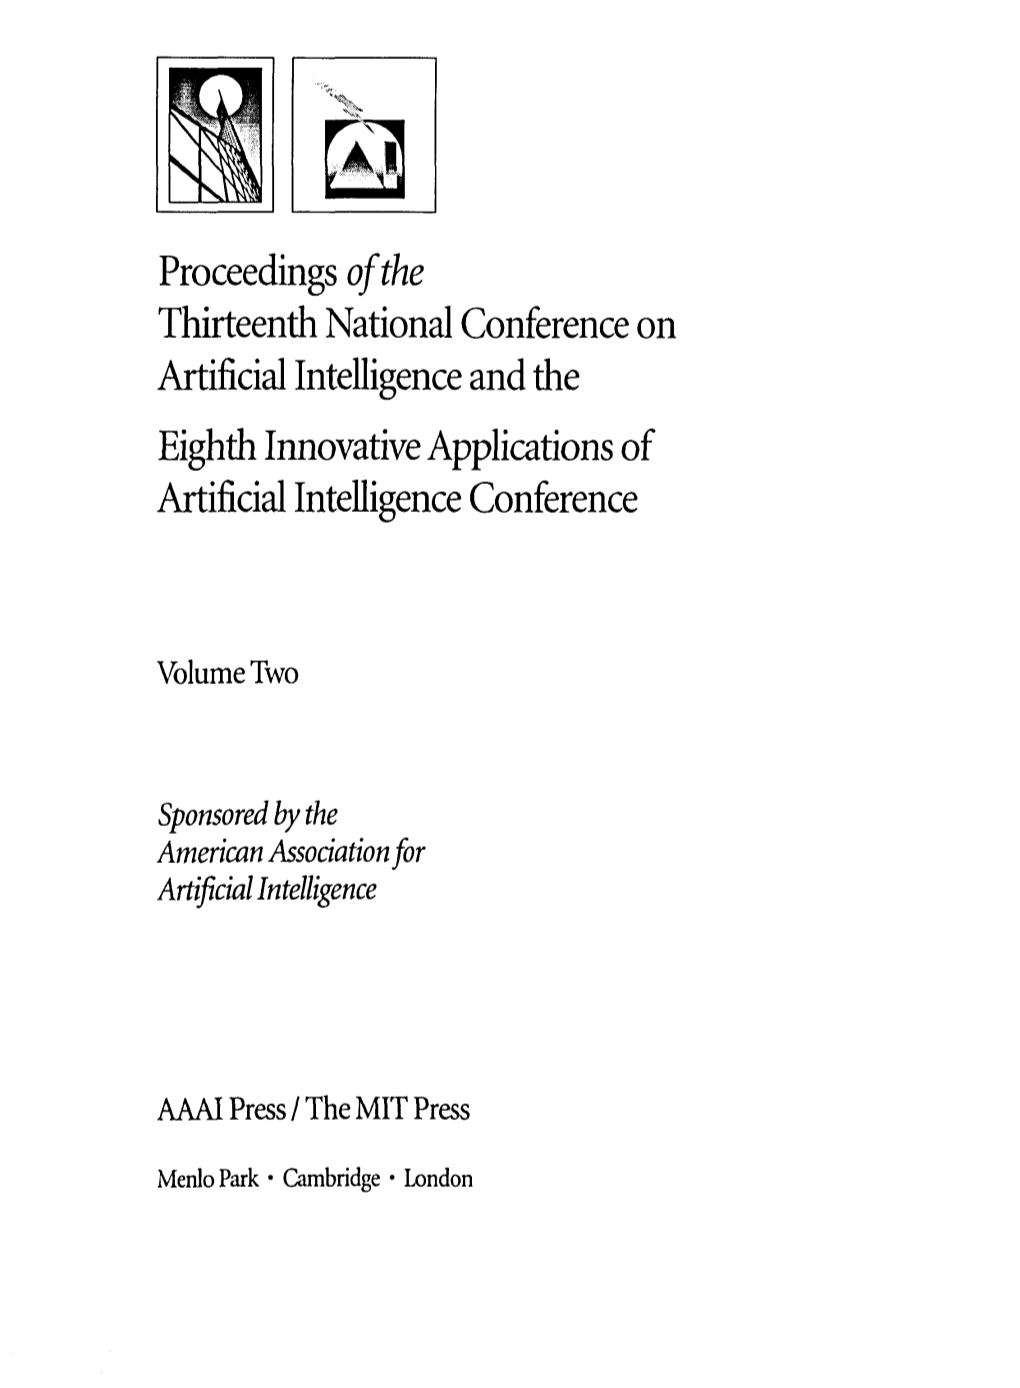 Proceedings of the Thirteenth National Conference on Artificial Intelligence and the Eighth Innovative Applications of Artificial Intelligence Conference